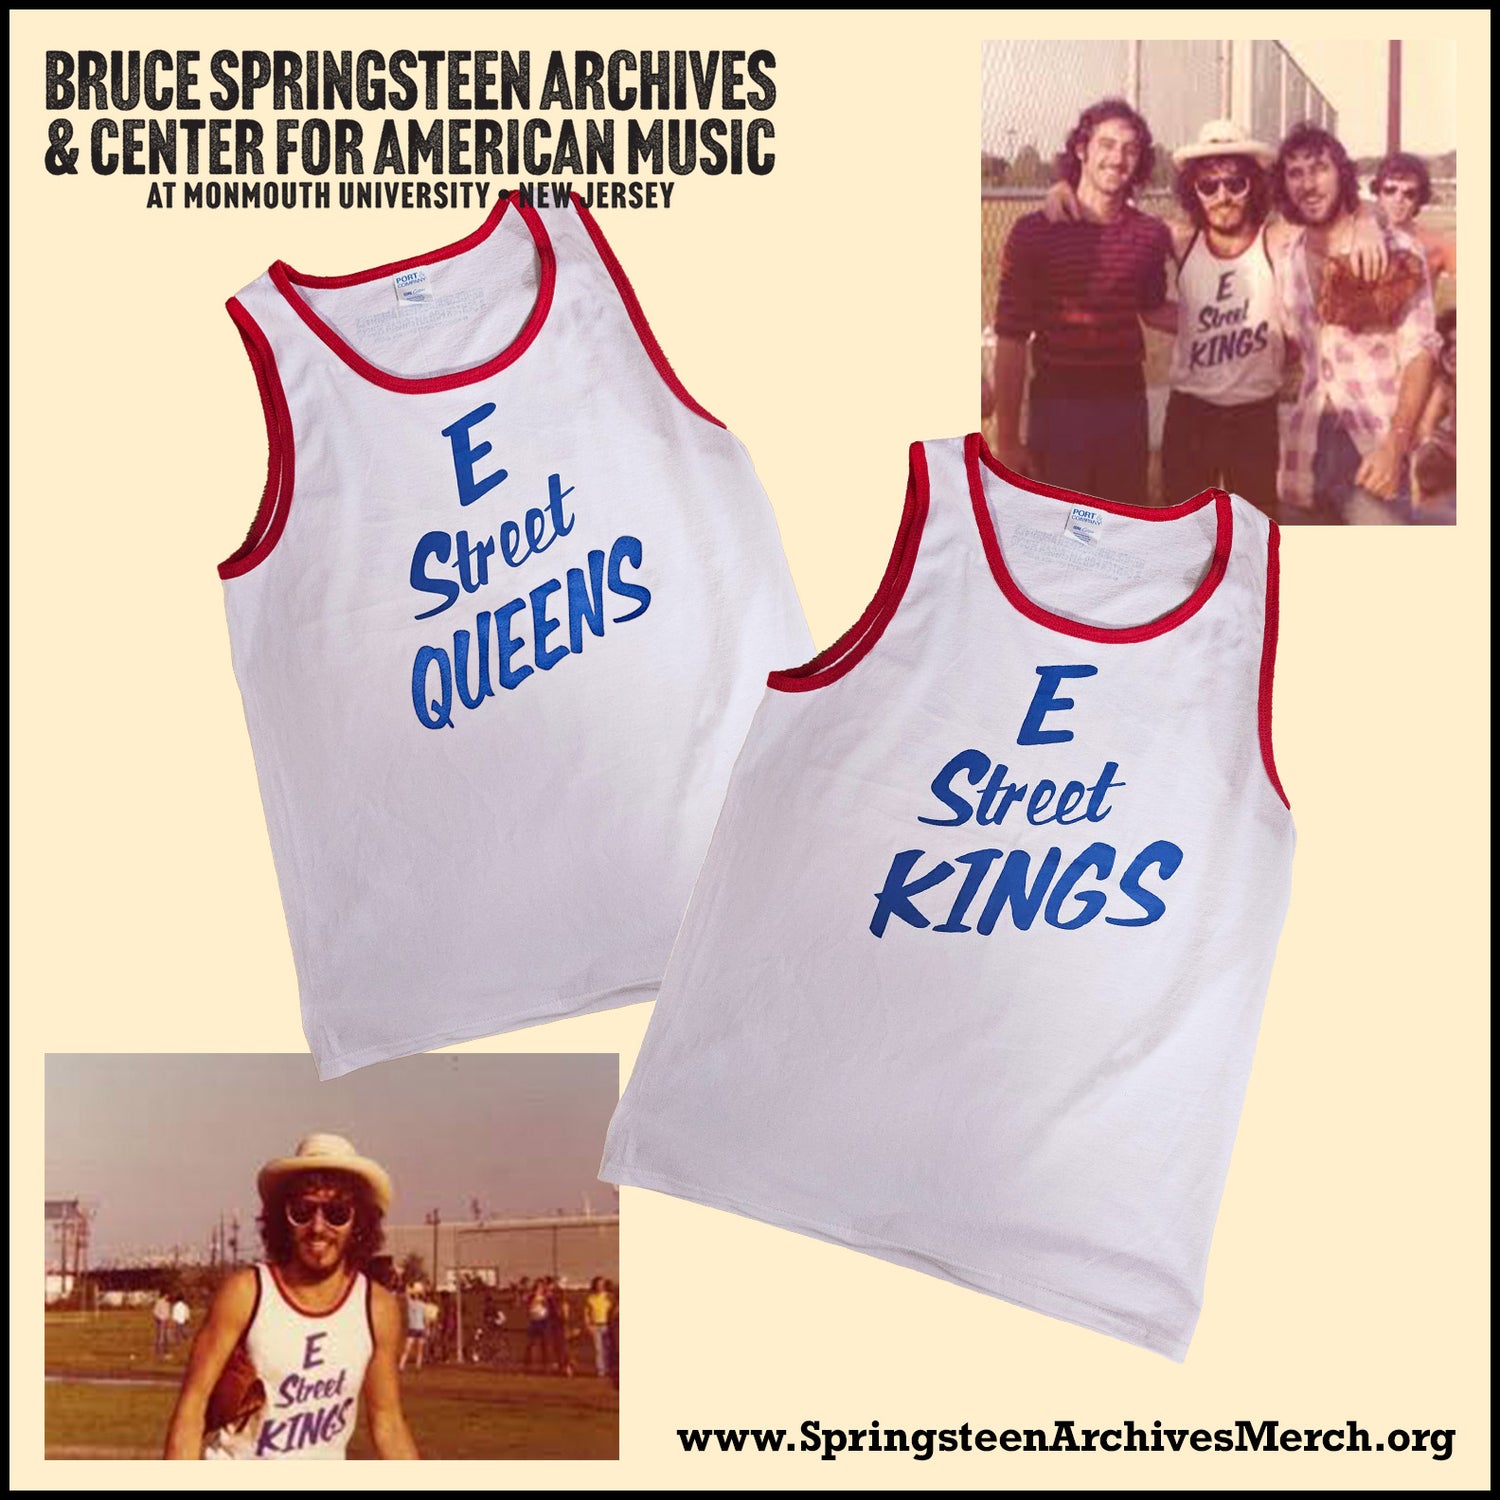 E Street Kings and Queens Jerseys